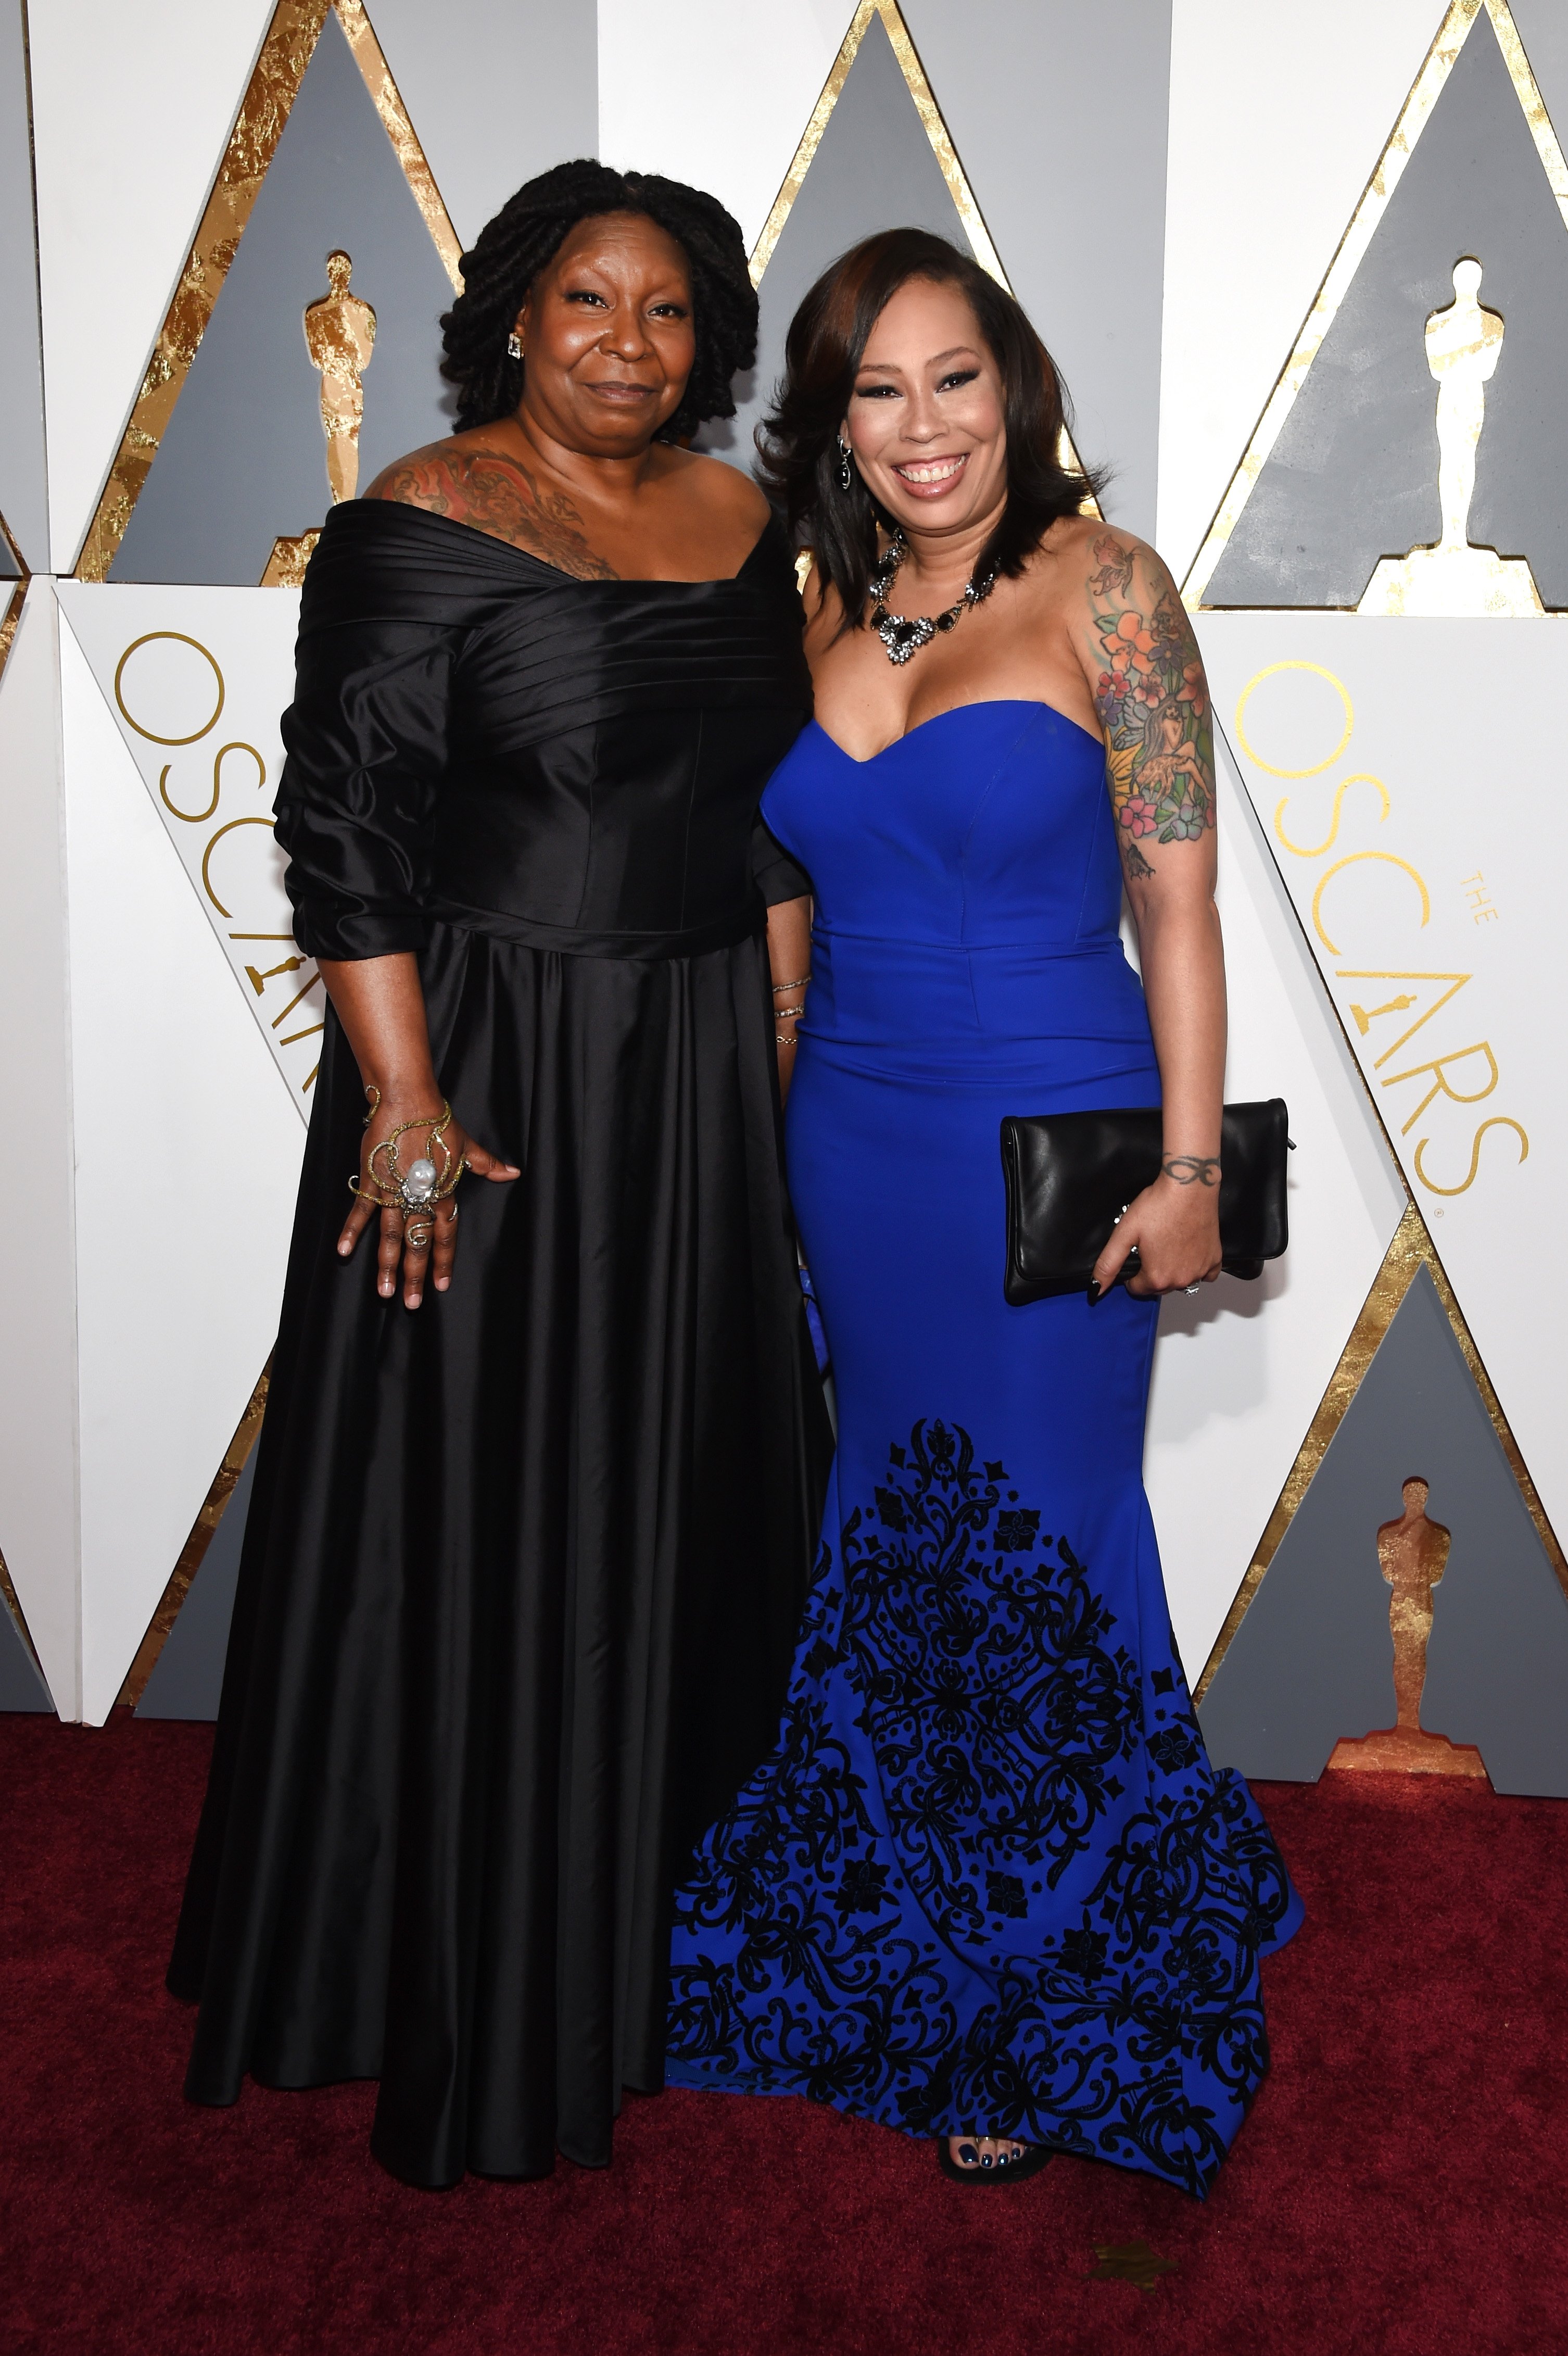 Whoopi Goldberg & Alex Martin at the 88th Annual Academy Awards in Hollywood on Feb. 28, 2016. |Photo: Getty Images 